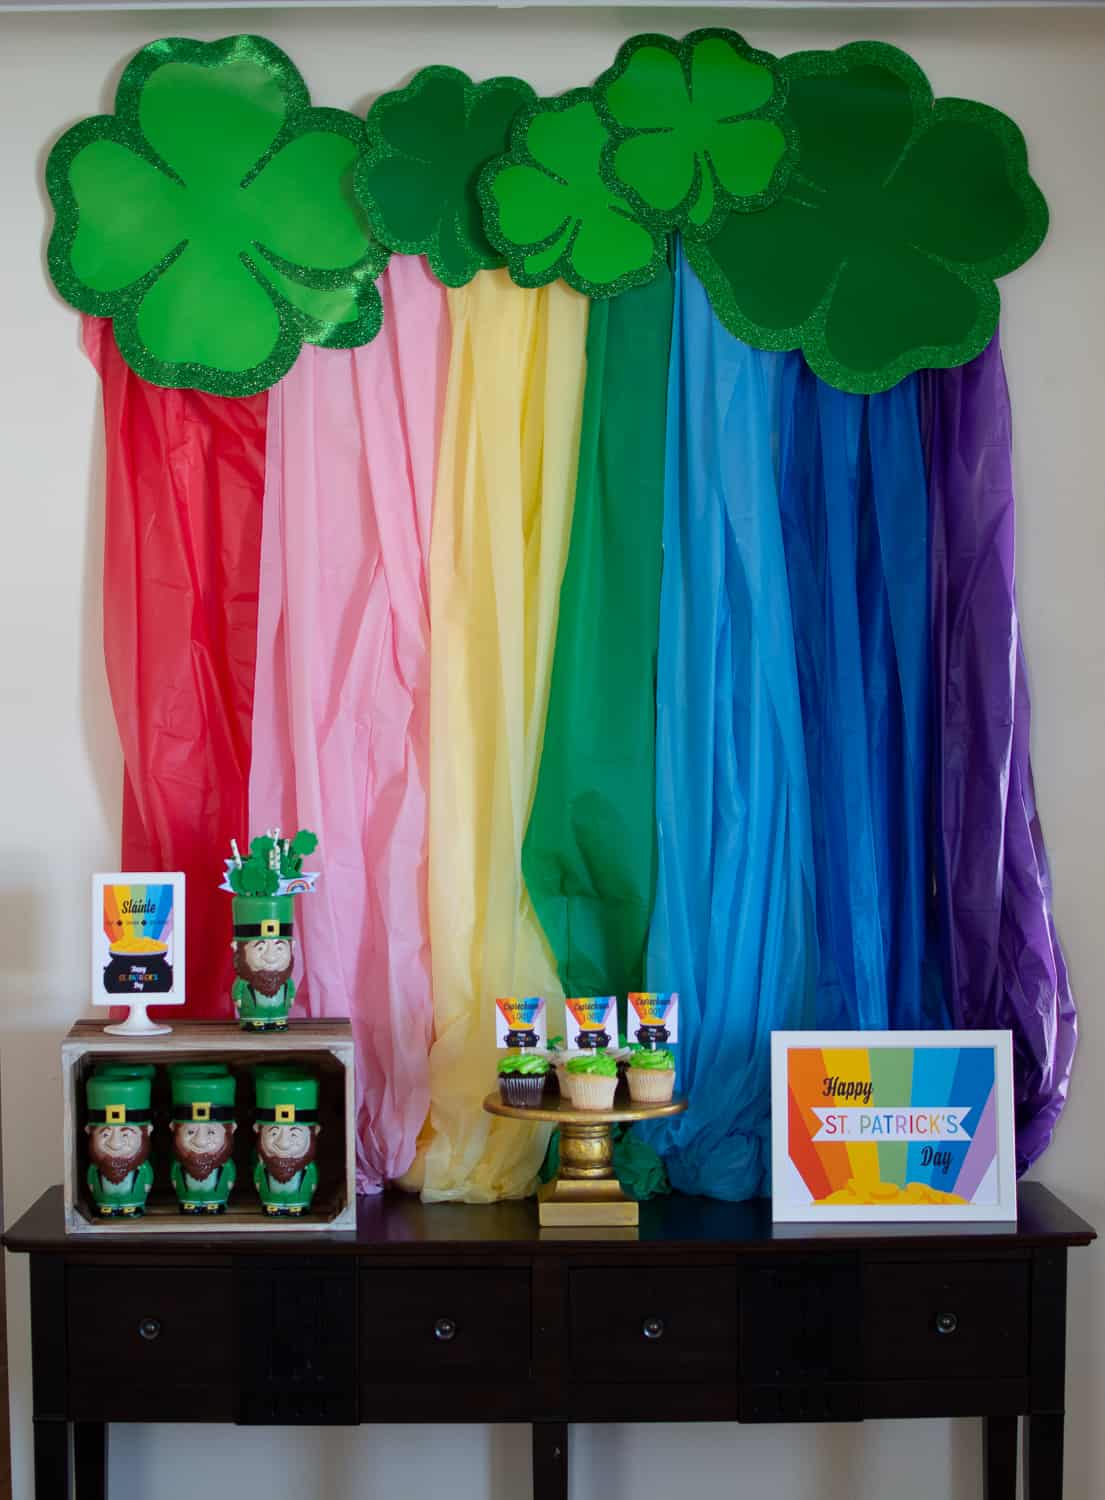 Easy "leprechaun loot" party ideas for St. Patrick's Day